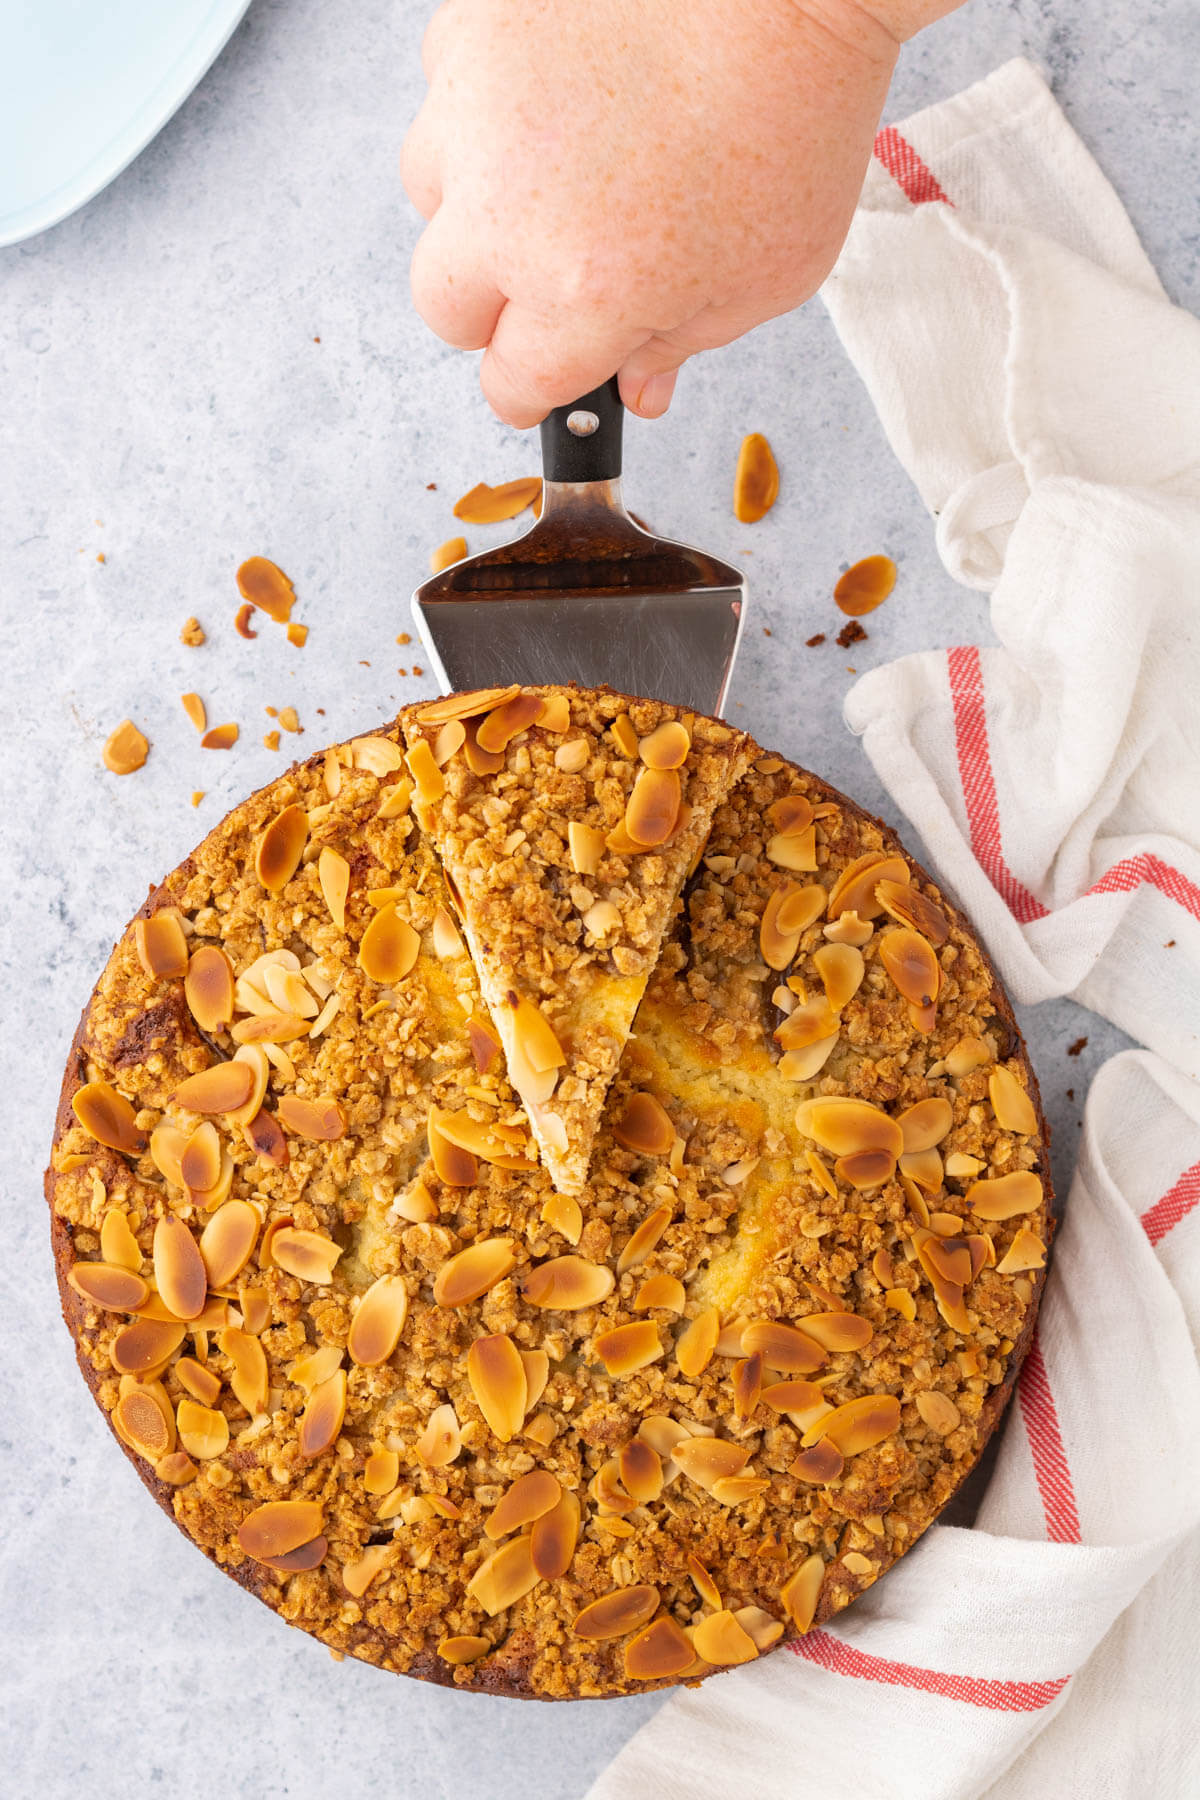 Overhead view of a golden almond crumble topped ricotta cake with a slice being served.